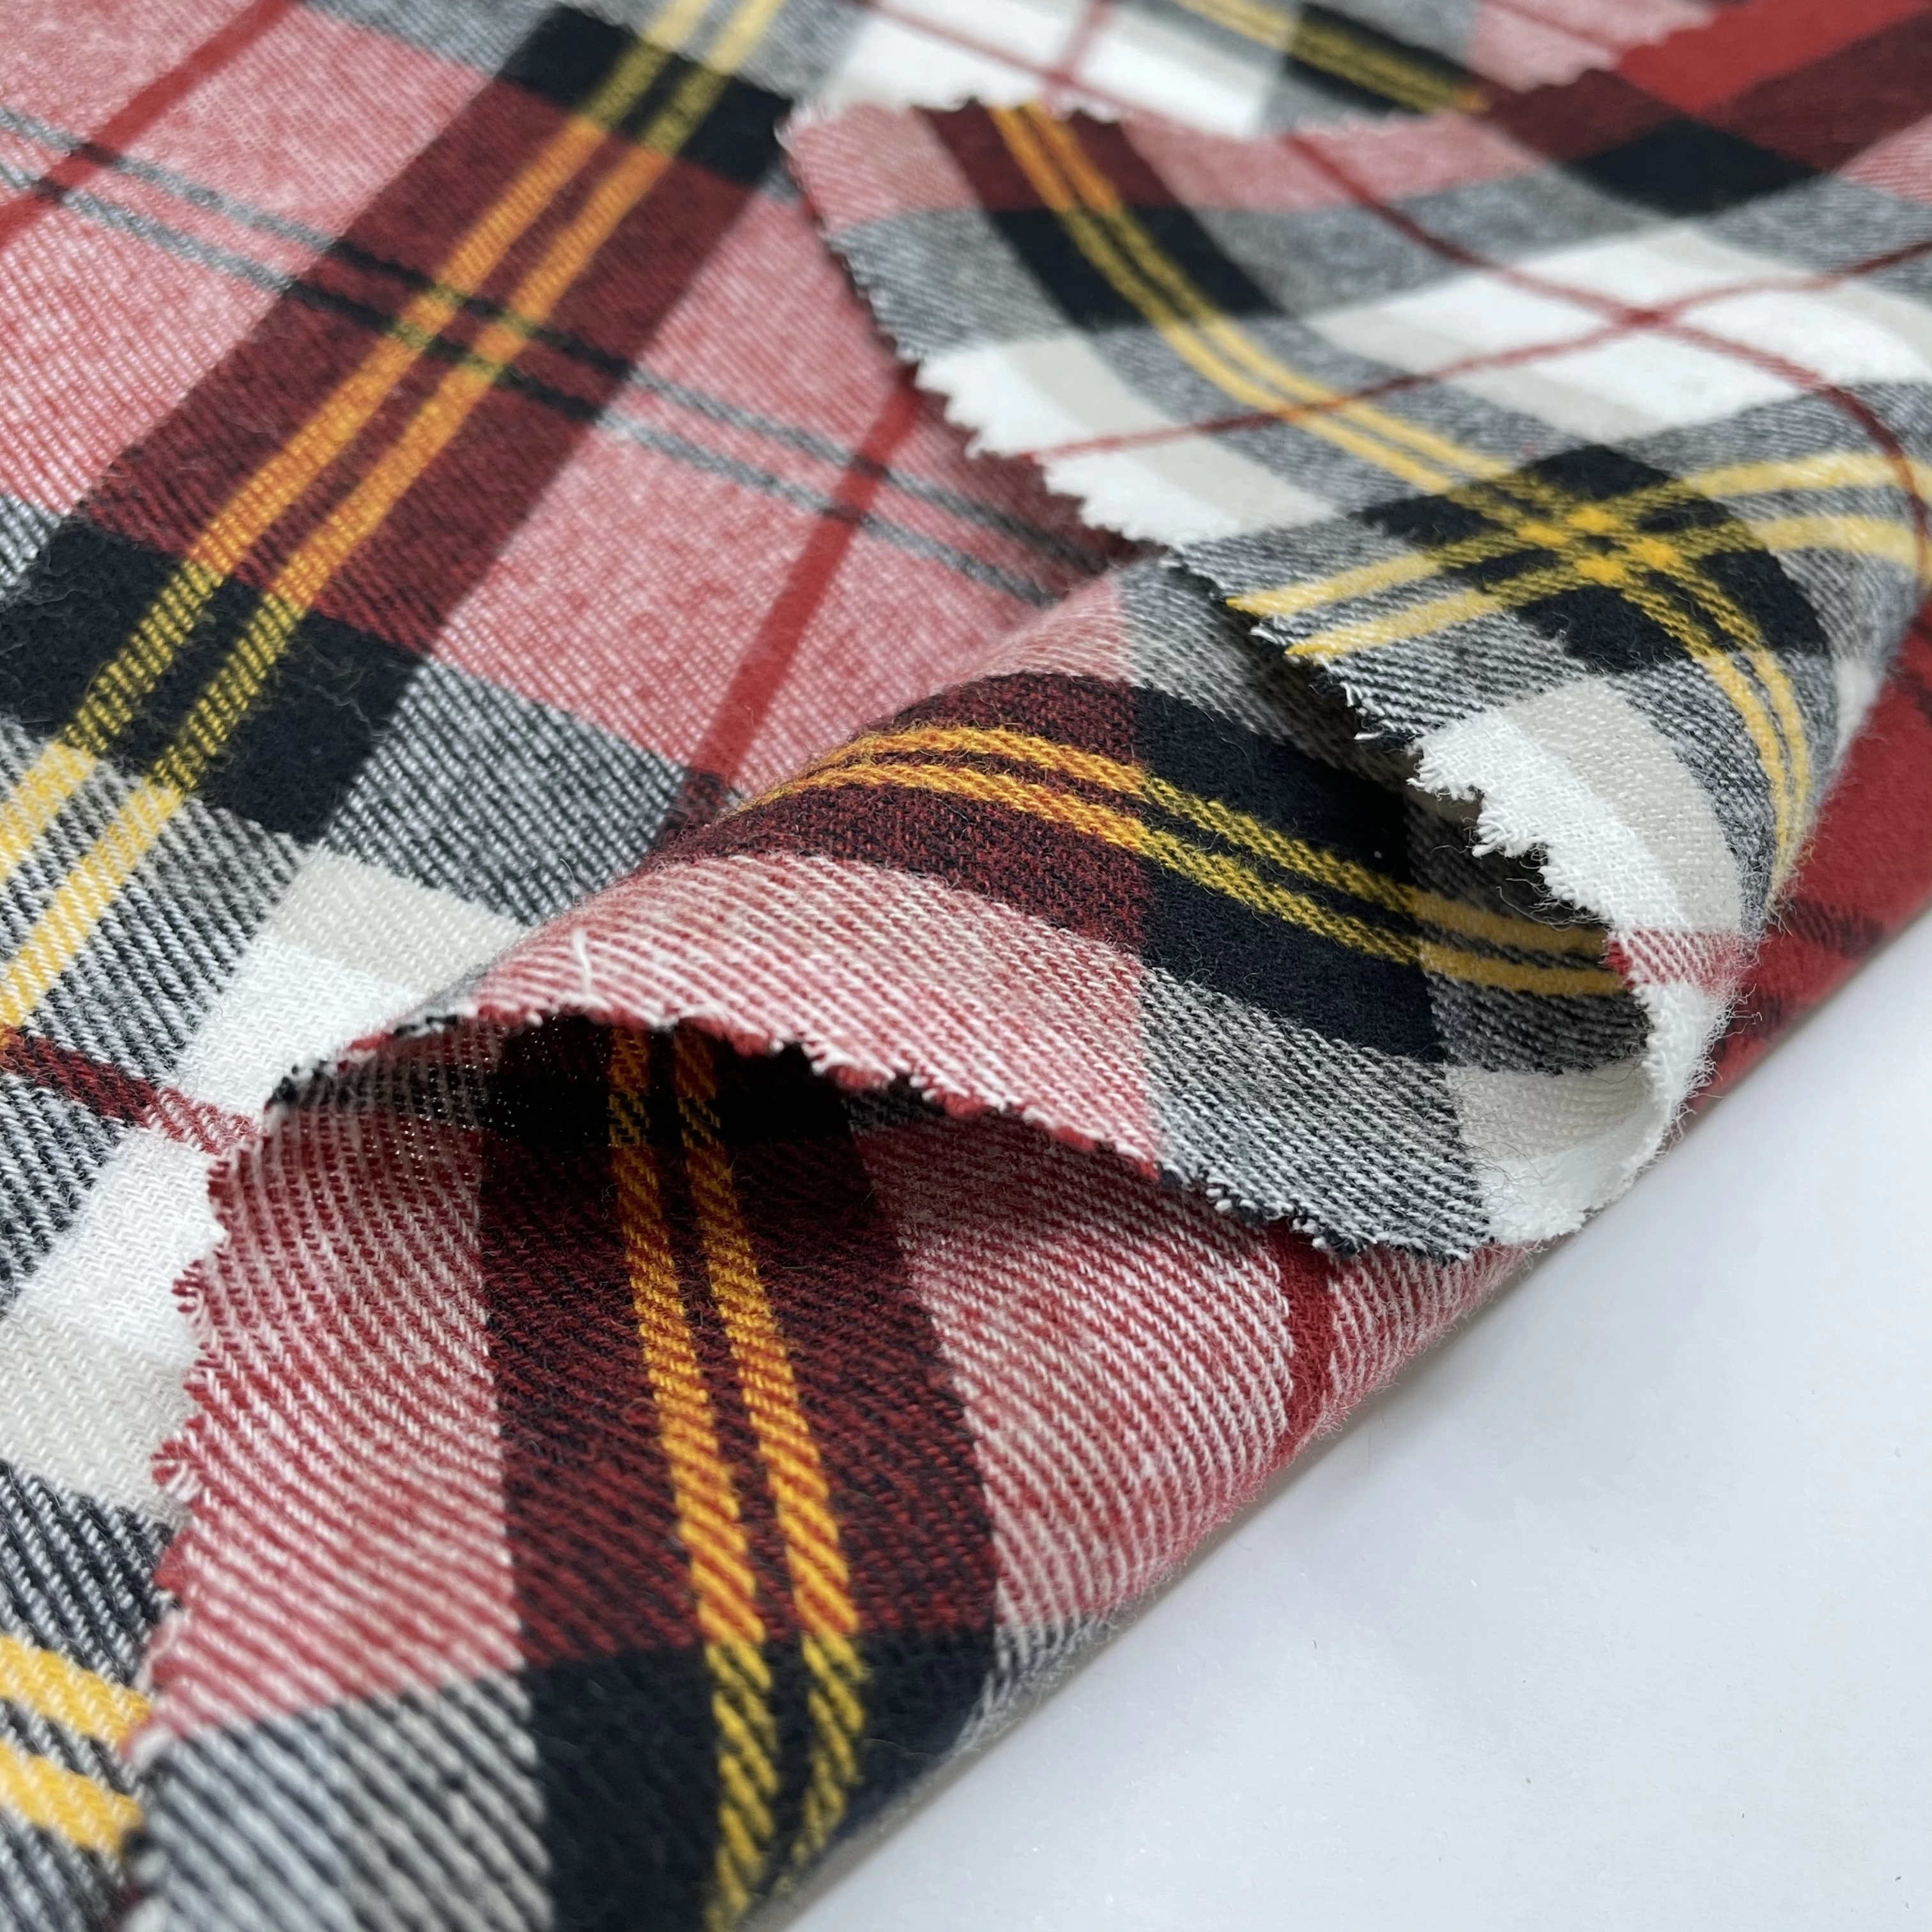 Hot selling woven 100%cotton plaid breathable Terry Fabric for dress